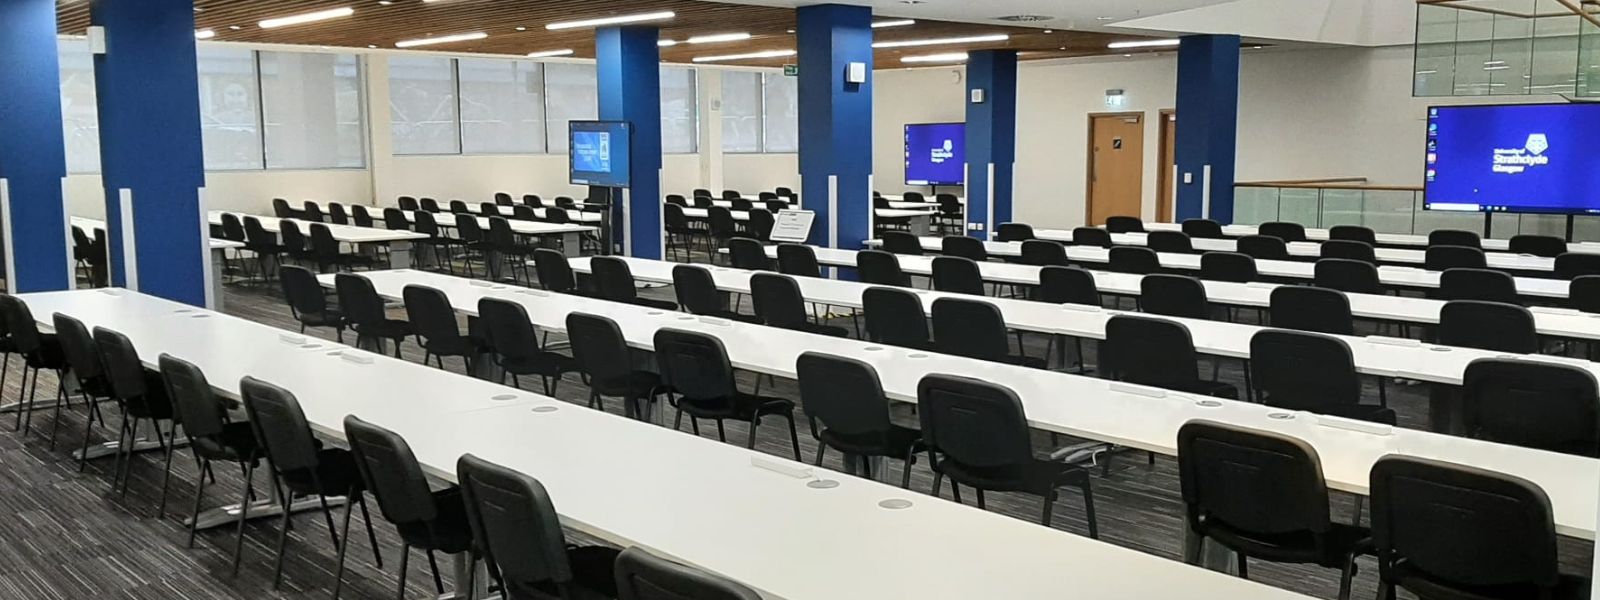 Tables and chairs set classroom style in the foyer for UCI media centre